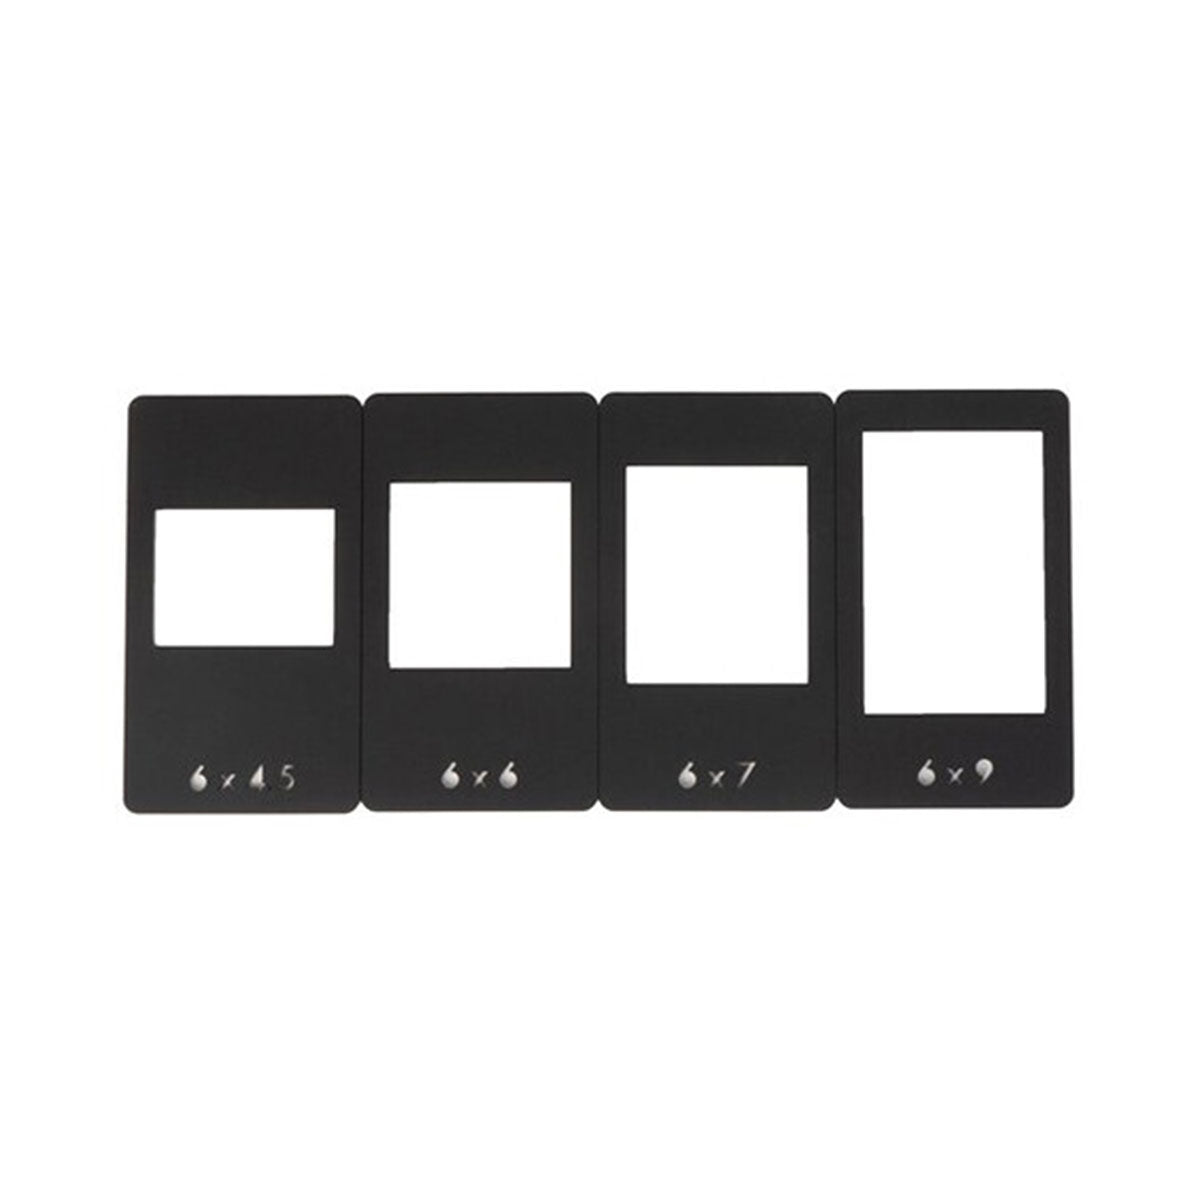 Negative Supply Enthusiast Plus Kit for 35mm, 120, and 4x5 Film Scanning (with Basic Riser XL)